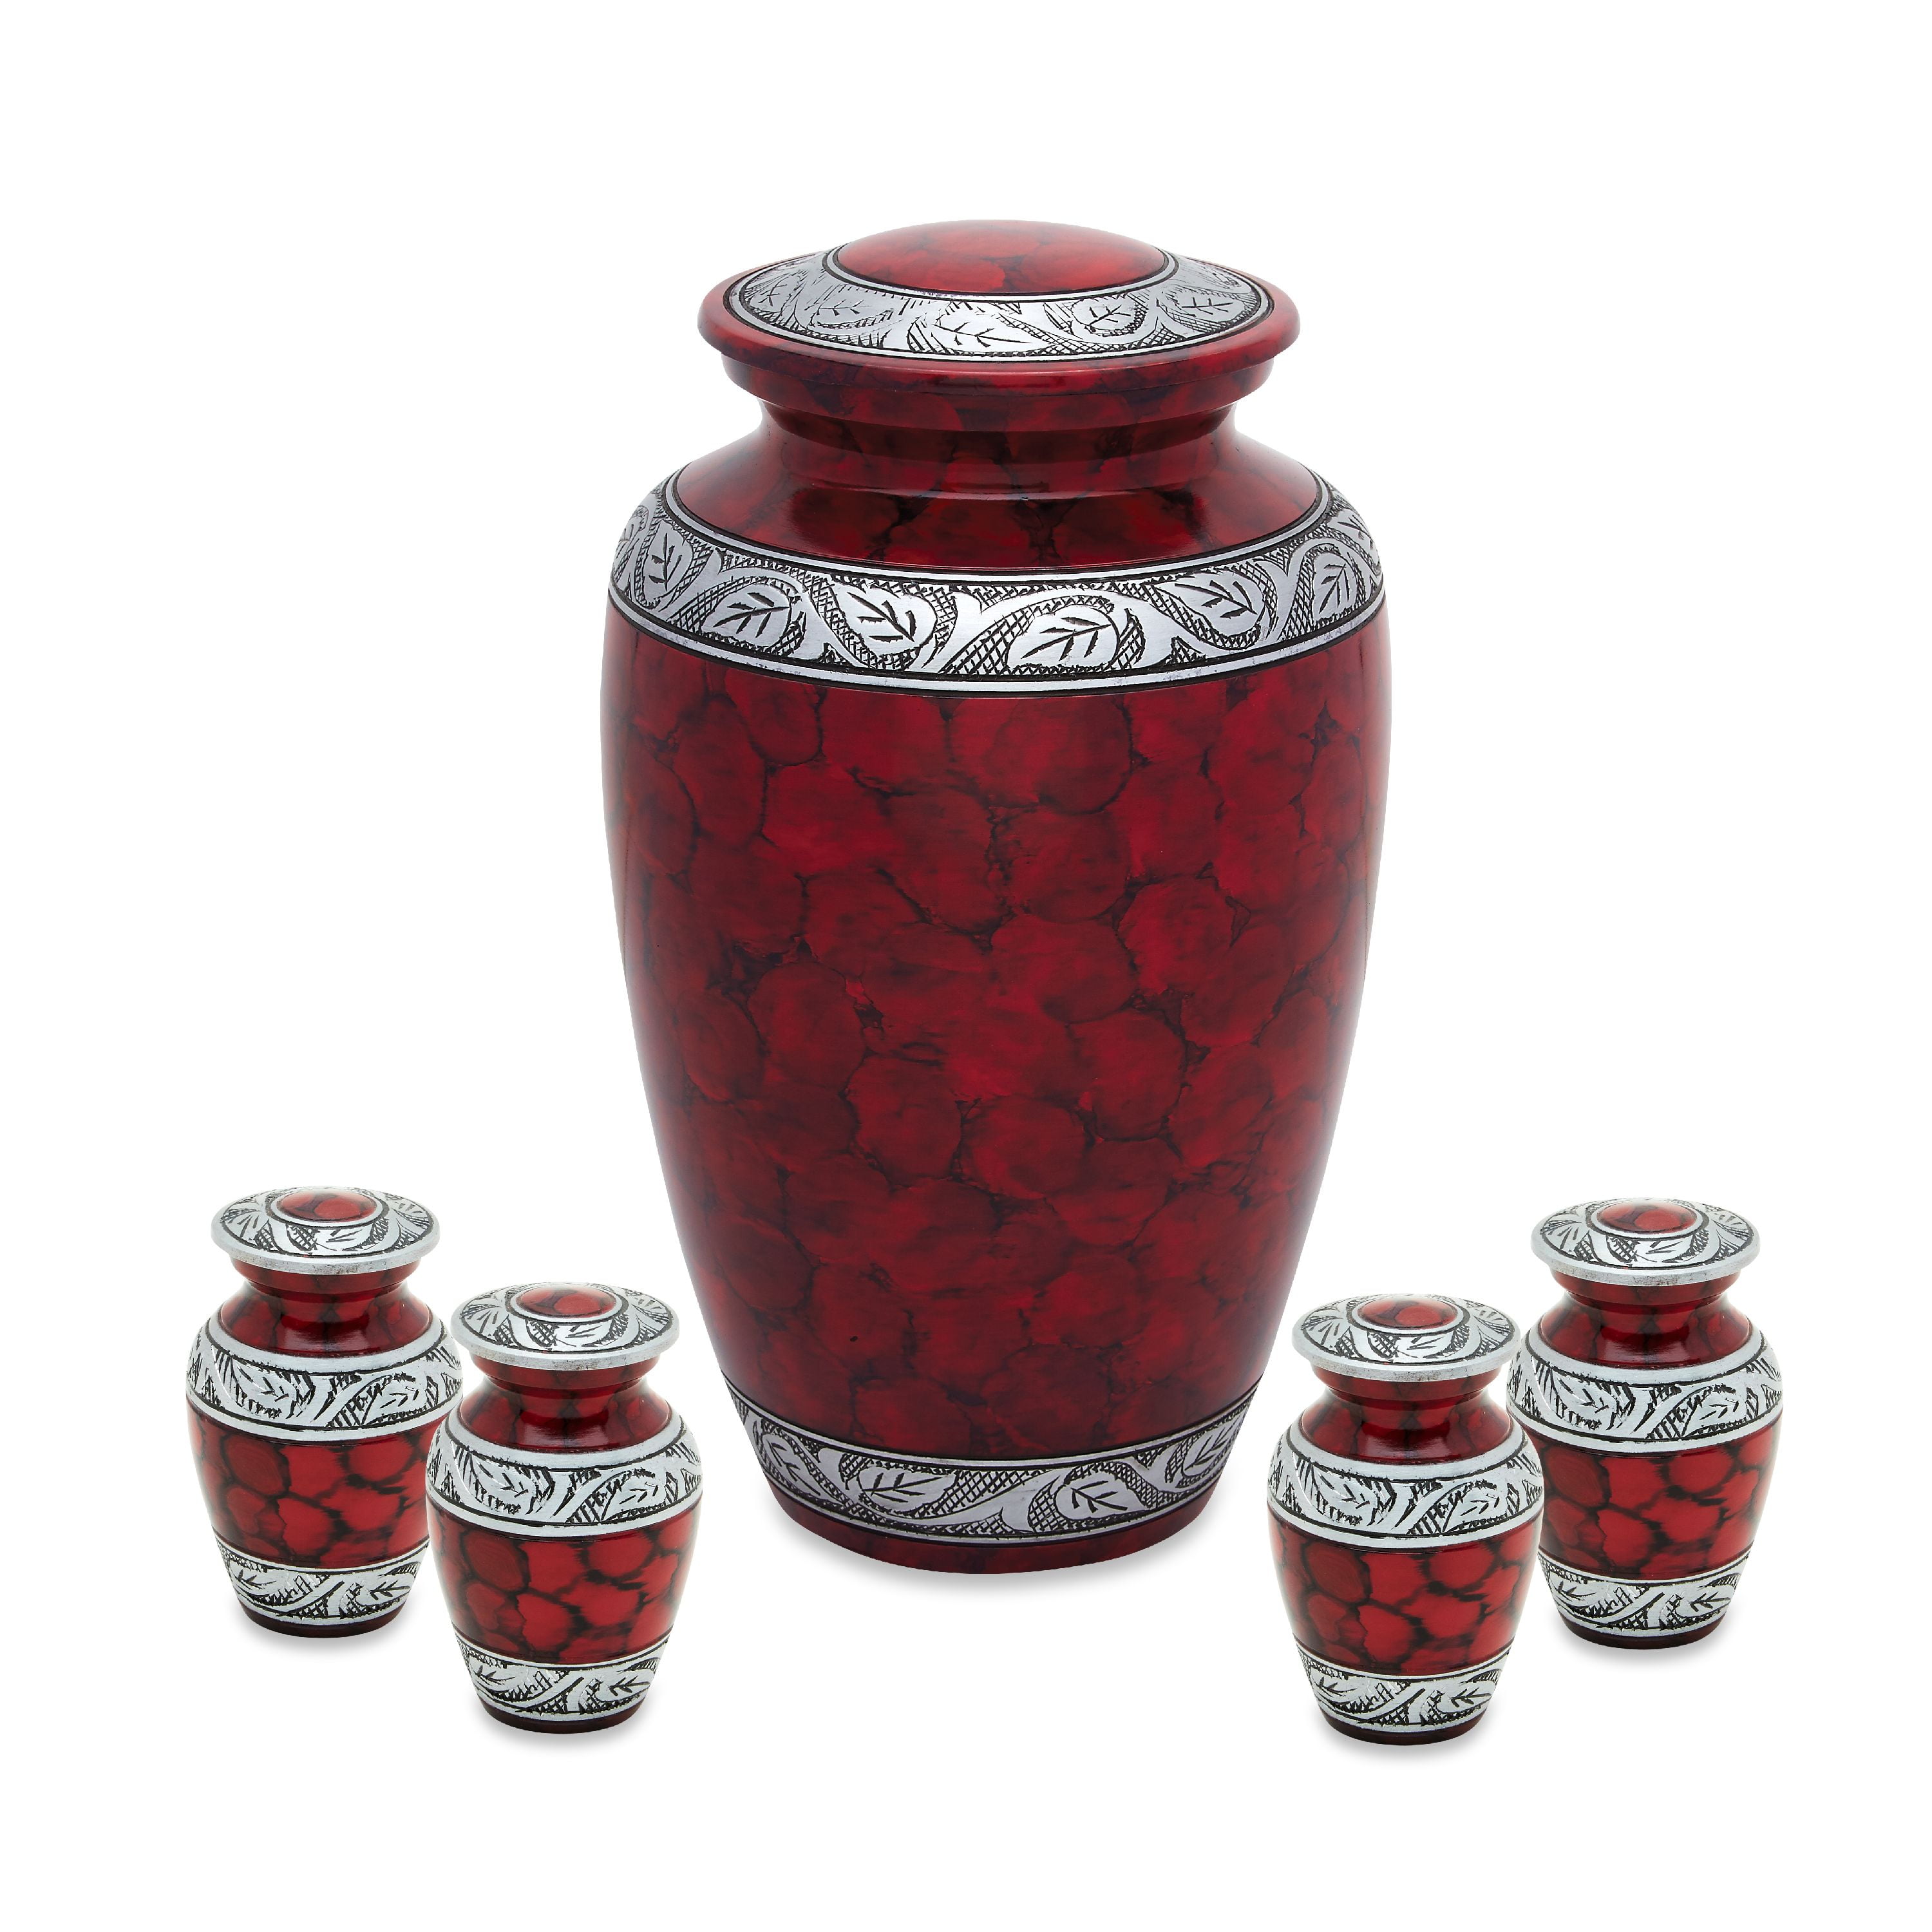 UGA Georgia Red Large Adult Cremation Funeral Urn For Ashes 220 Cubic Inch 